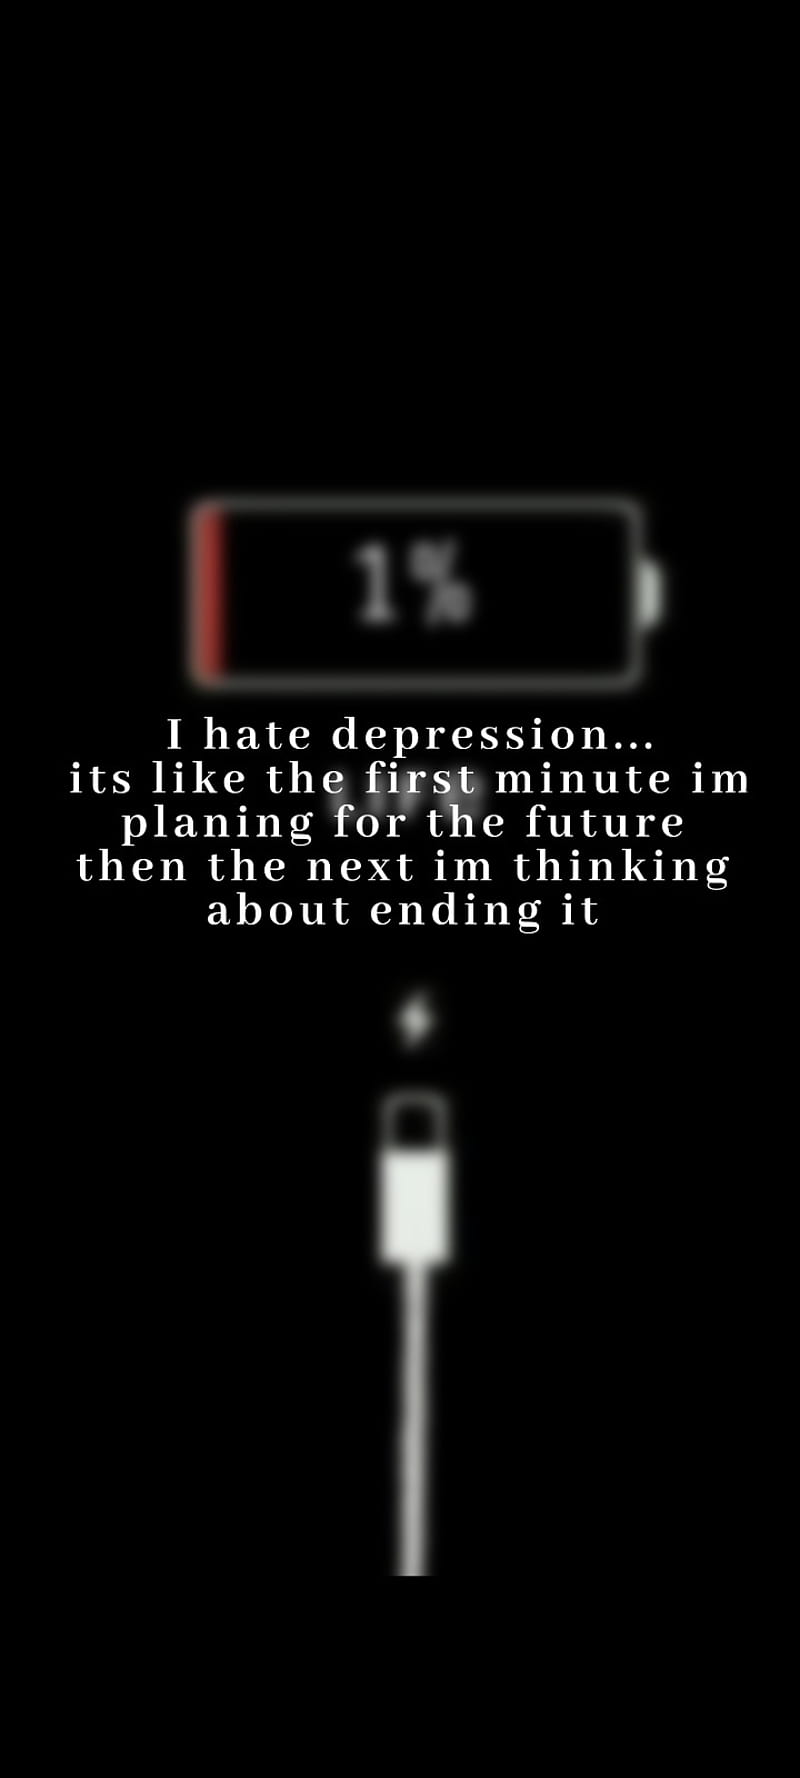 Pick a side already, depression, quote, sad, HD phone wallpaper | Peakpx